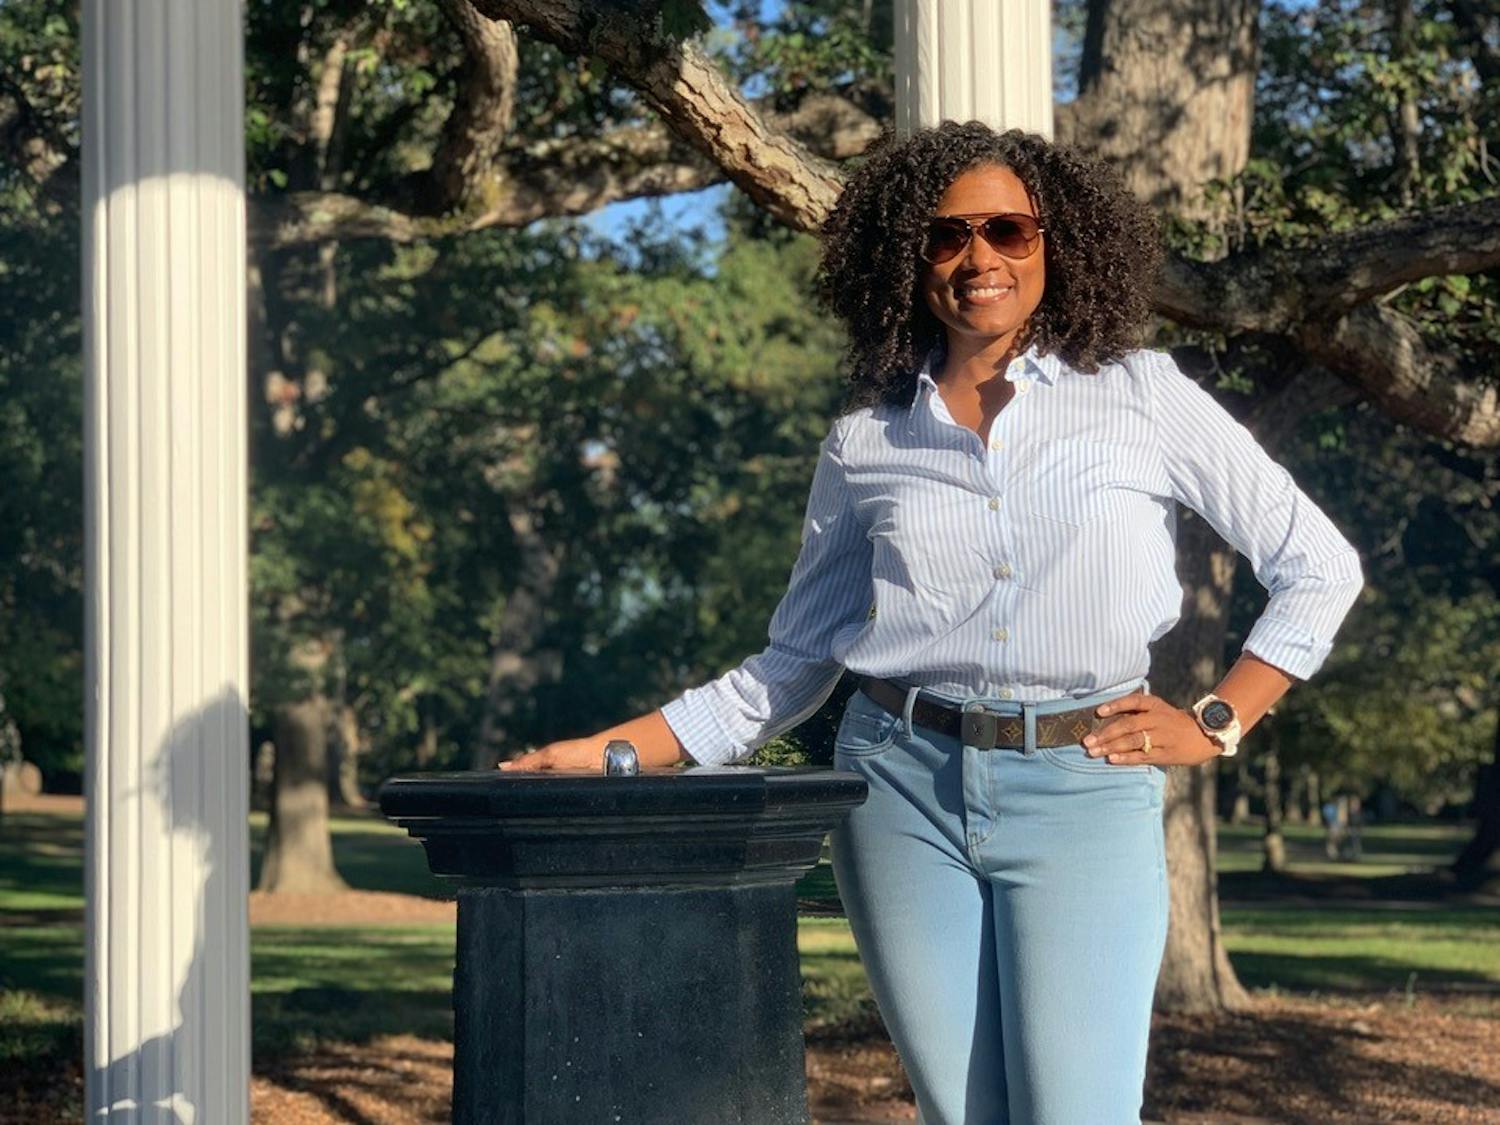 Janora McDuffie, a Durham native and UNC alumna, will be one of the first Black and queer announcers in Oscar history. Photo courtesy of Janora McDuffie.